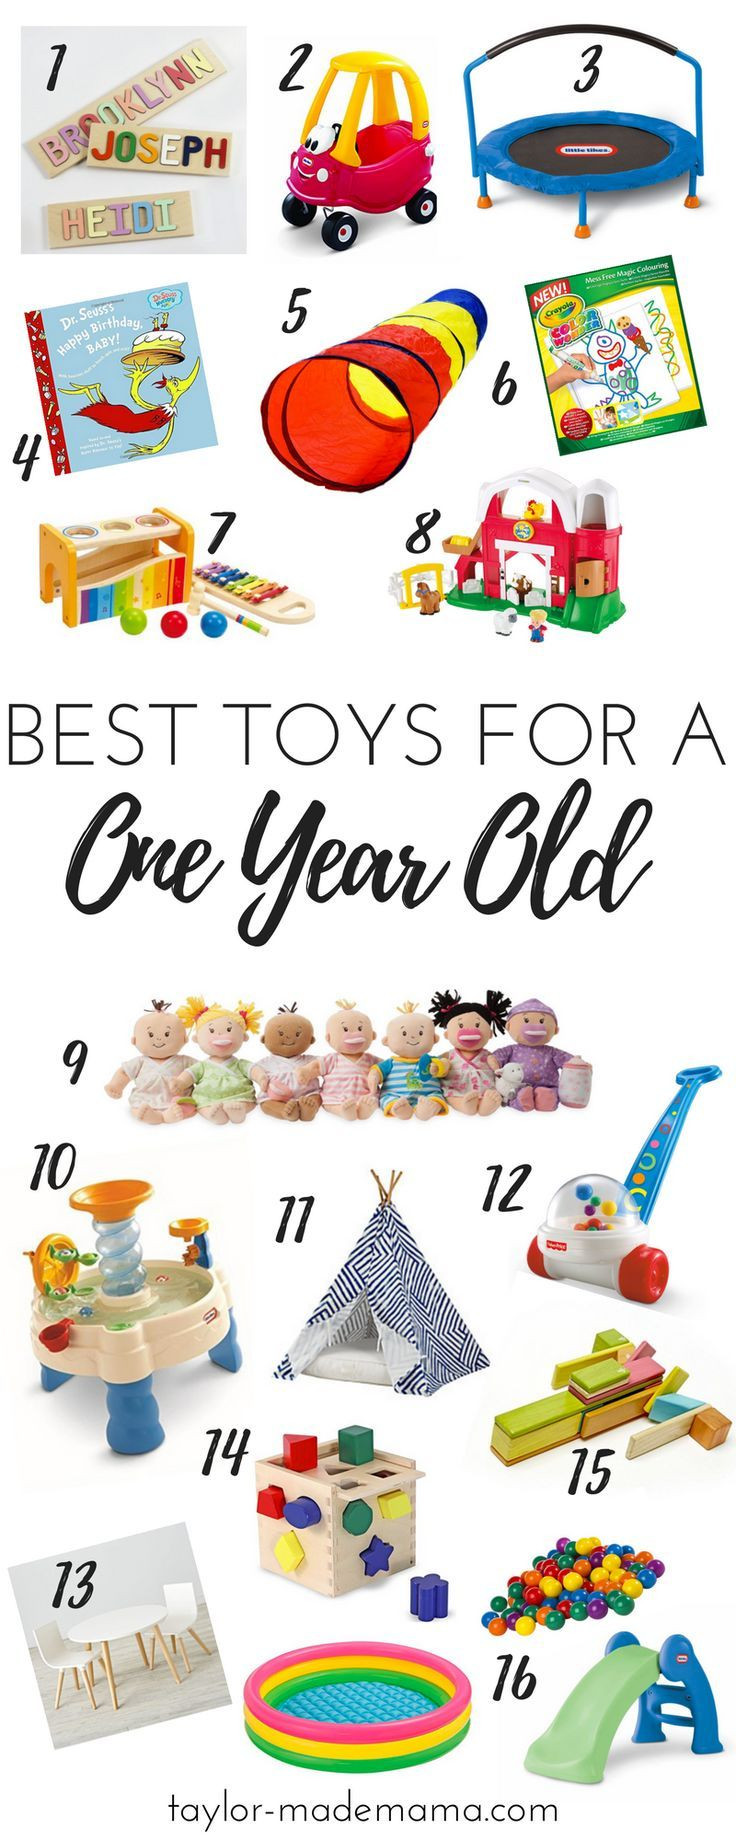 1St Birthday Gift Ideas
 The Ultimate First Birthday Party Planning And Gift Guide